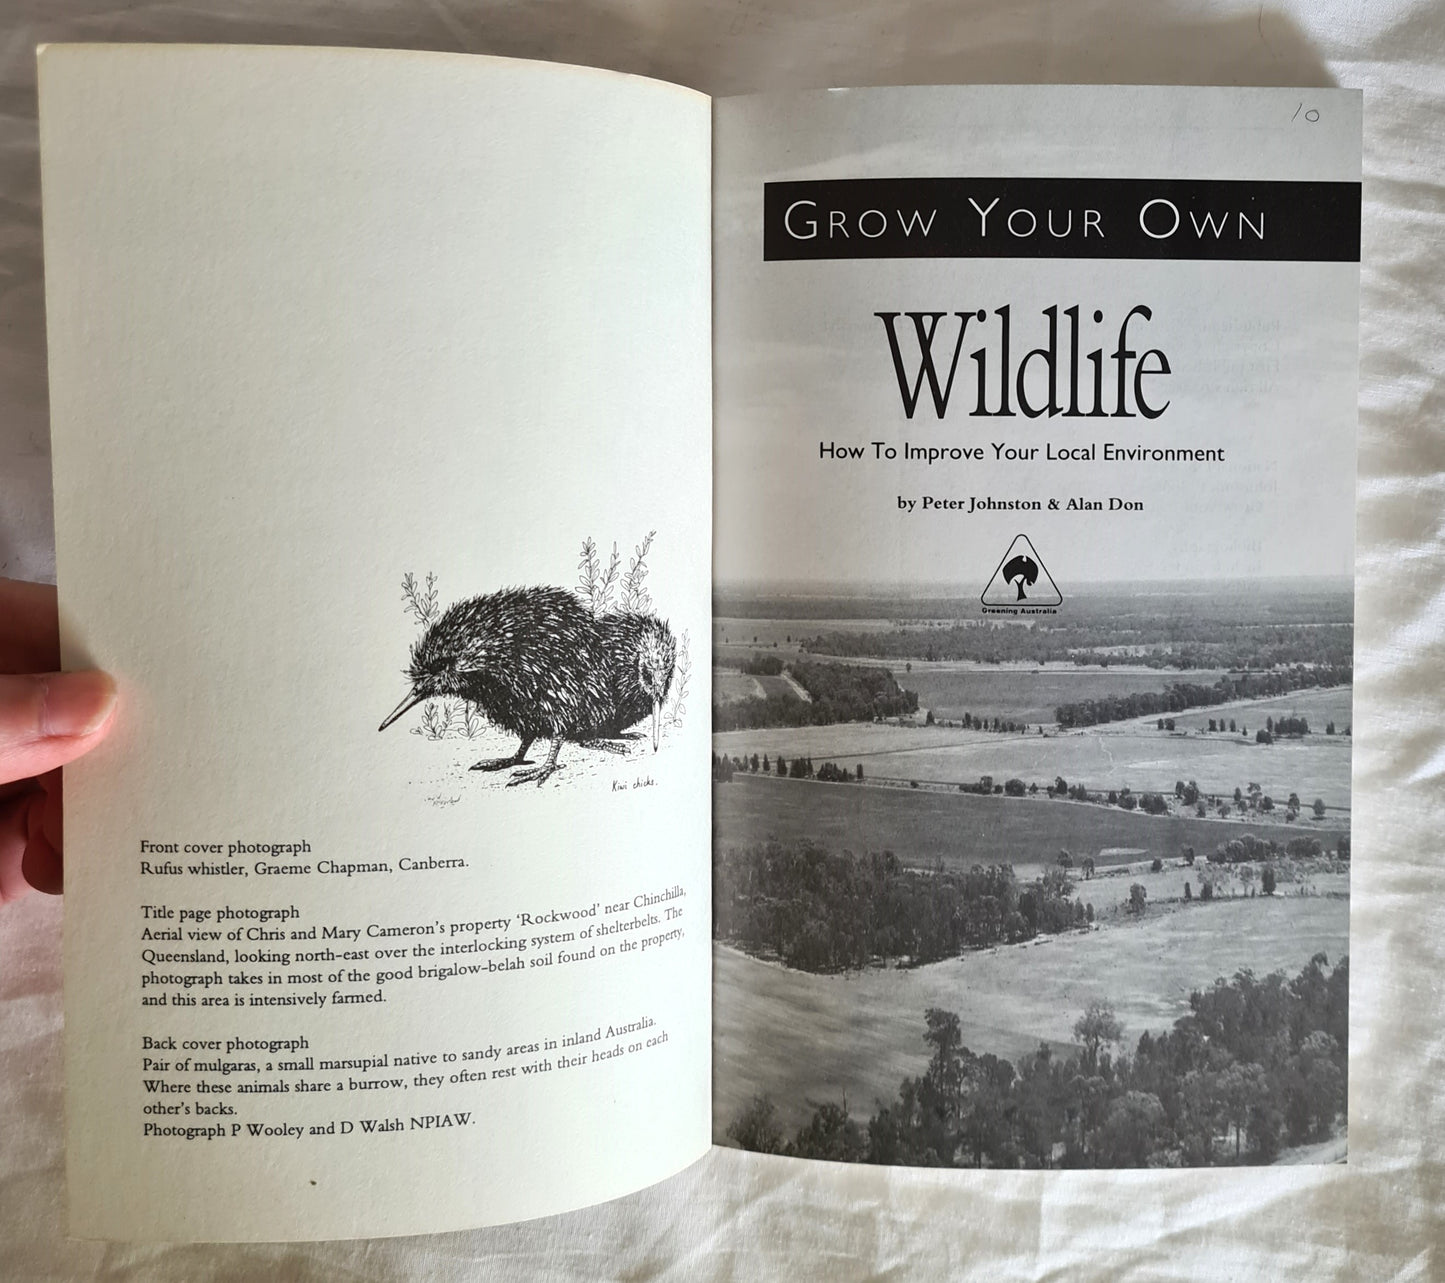 Grow Your Own Wildlife by Peter Johnston and Alan Don